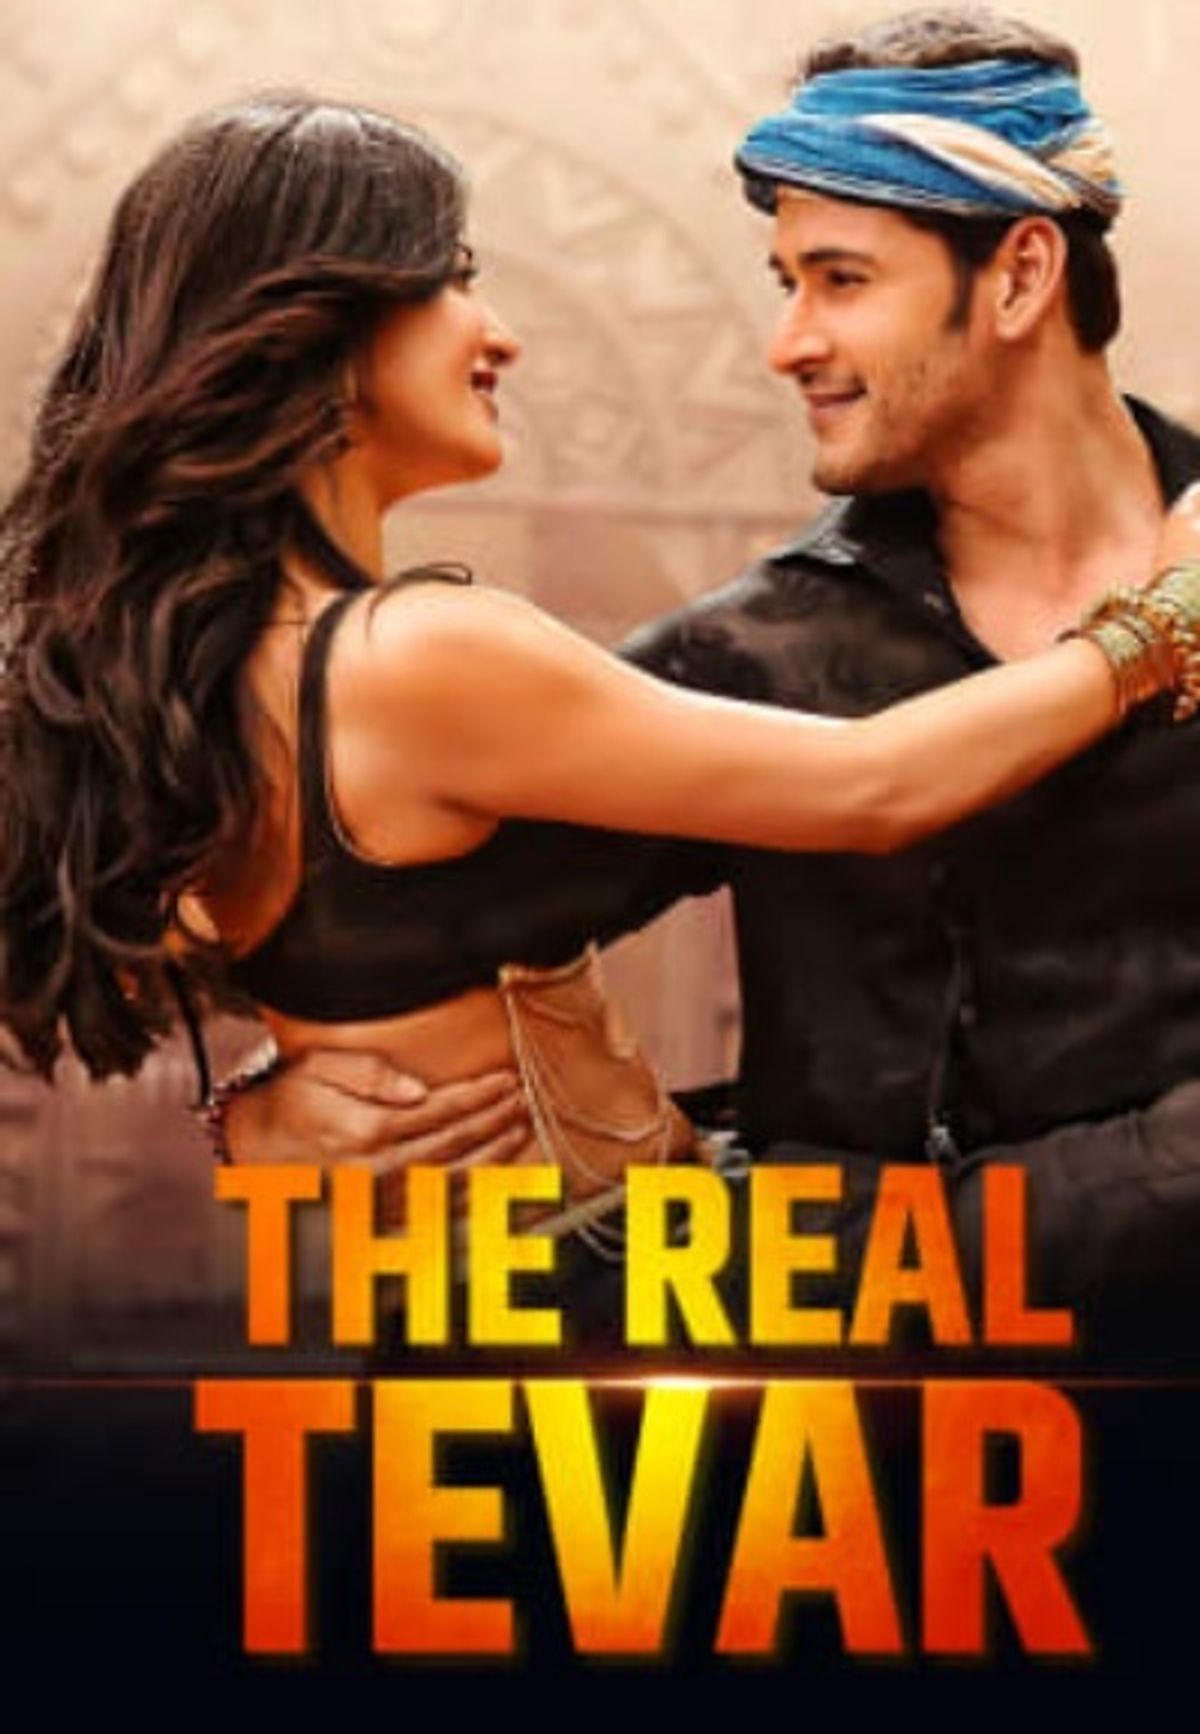 The Real Tevar (Srimanthudu) (2015) Hindi Dubbed HDRip download full movie